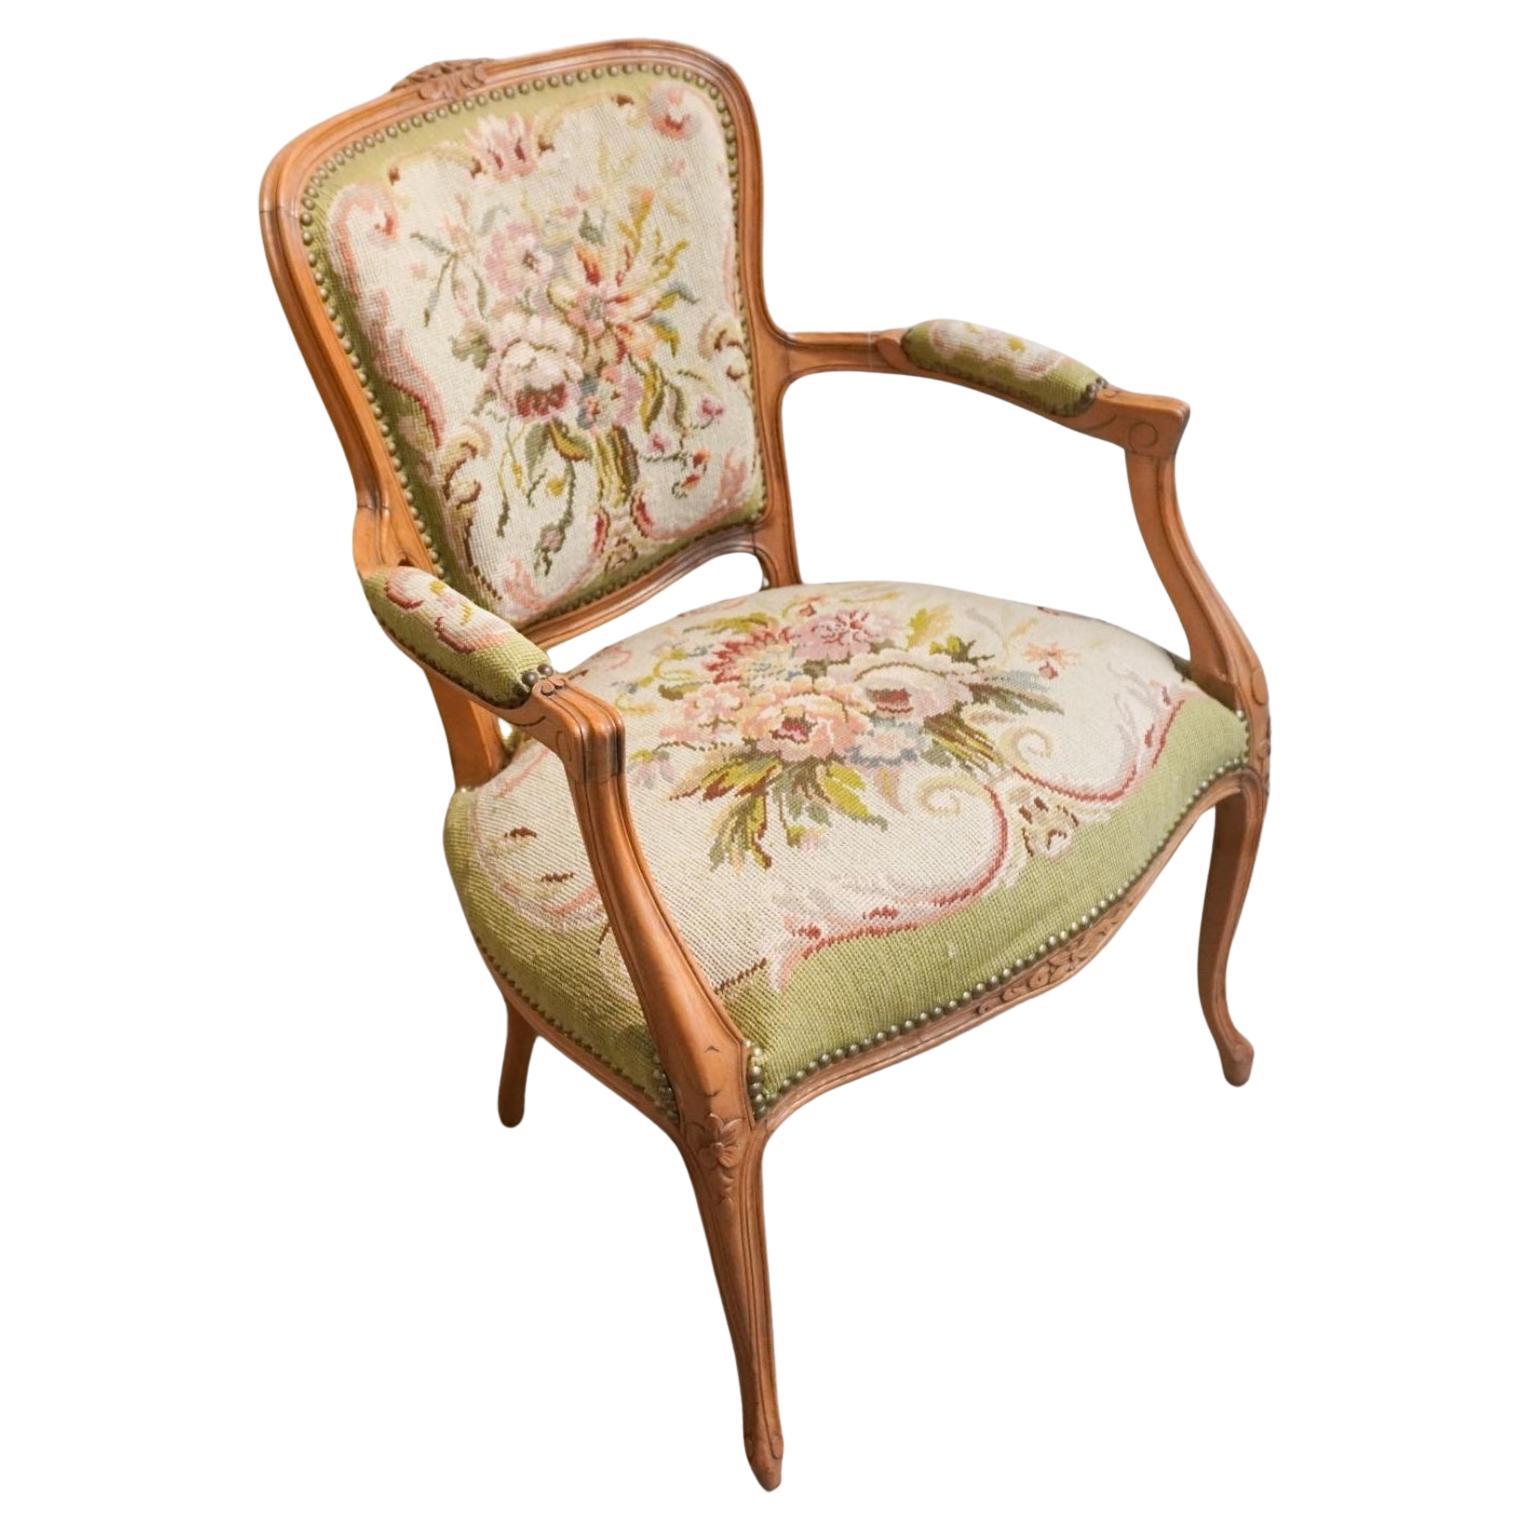 A Louis XV Style Fruitwood And Needlepoint Upholstered Fauteuil.
Measures Meaures 23.5